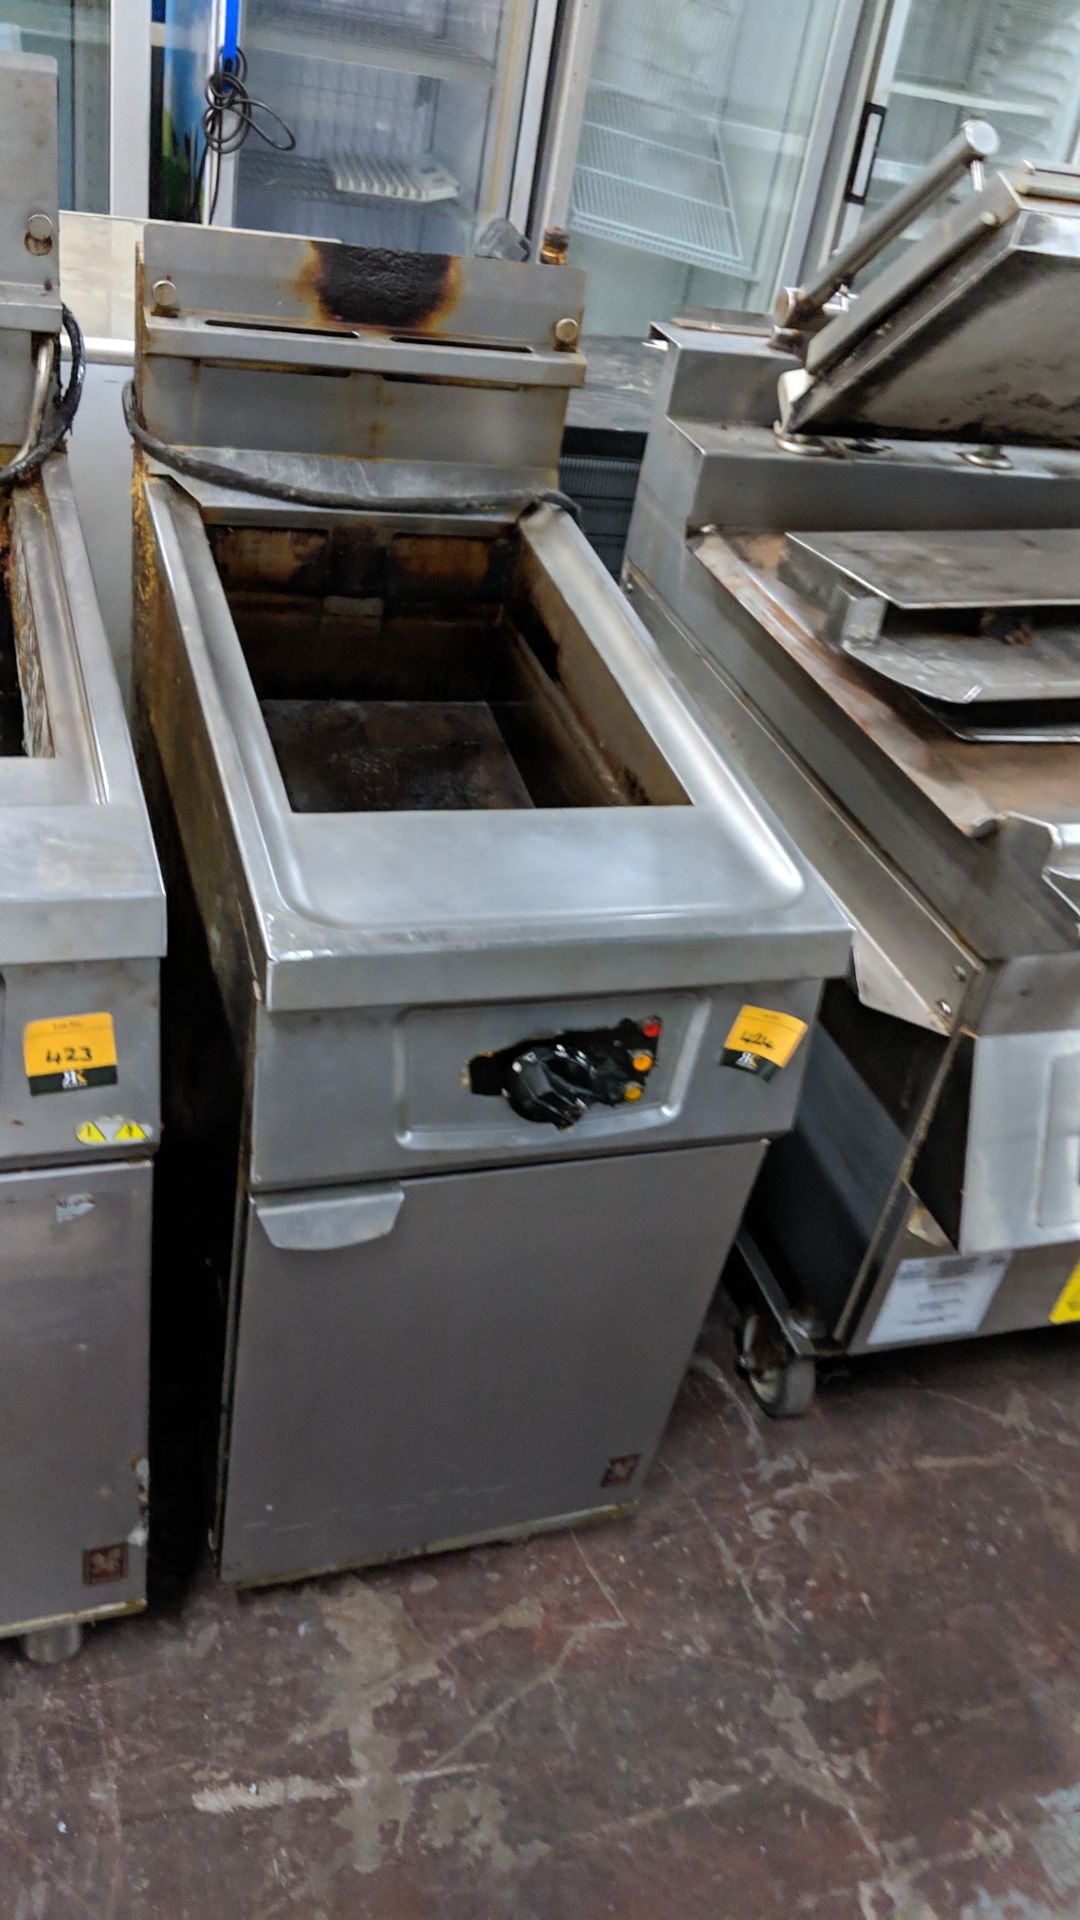 Falcon stainless steel floorstanding fryer IMPORTANT: Please remember goods successfully bid upon - Image 2 of 6